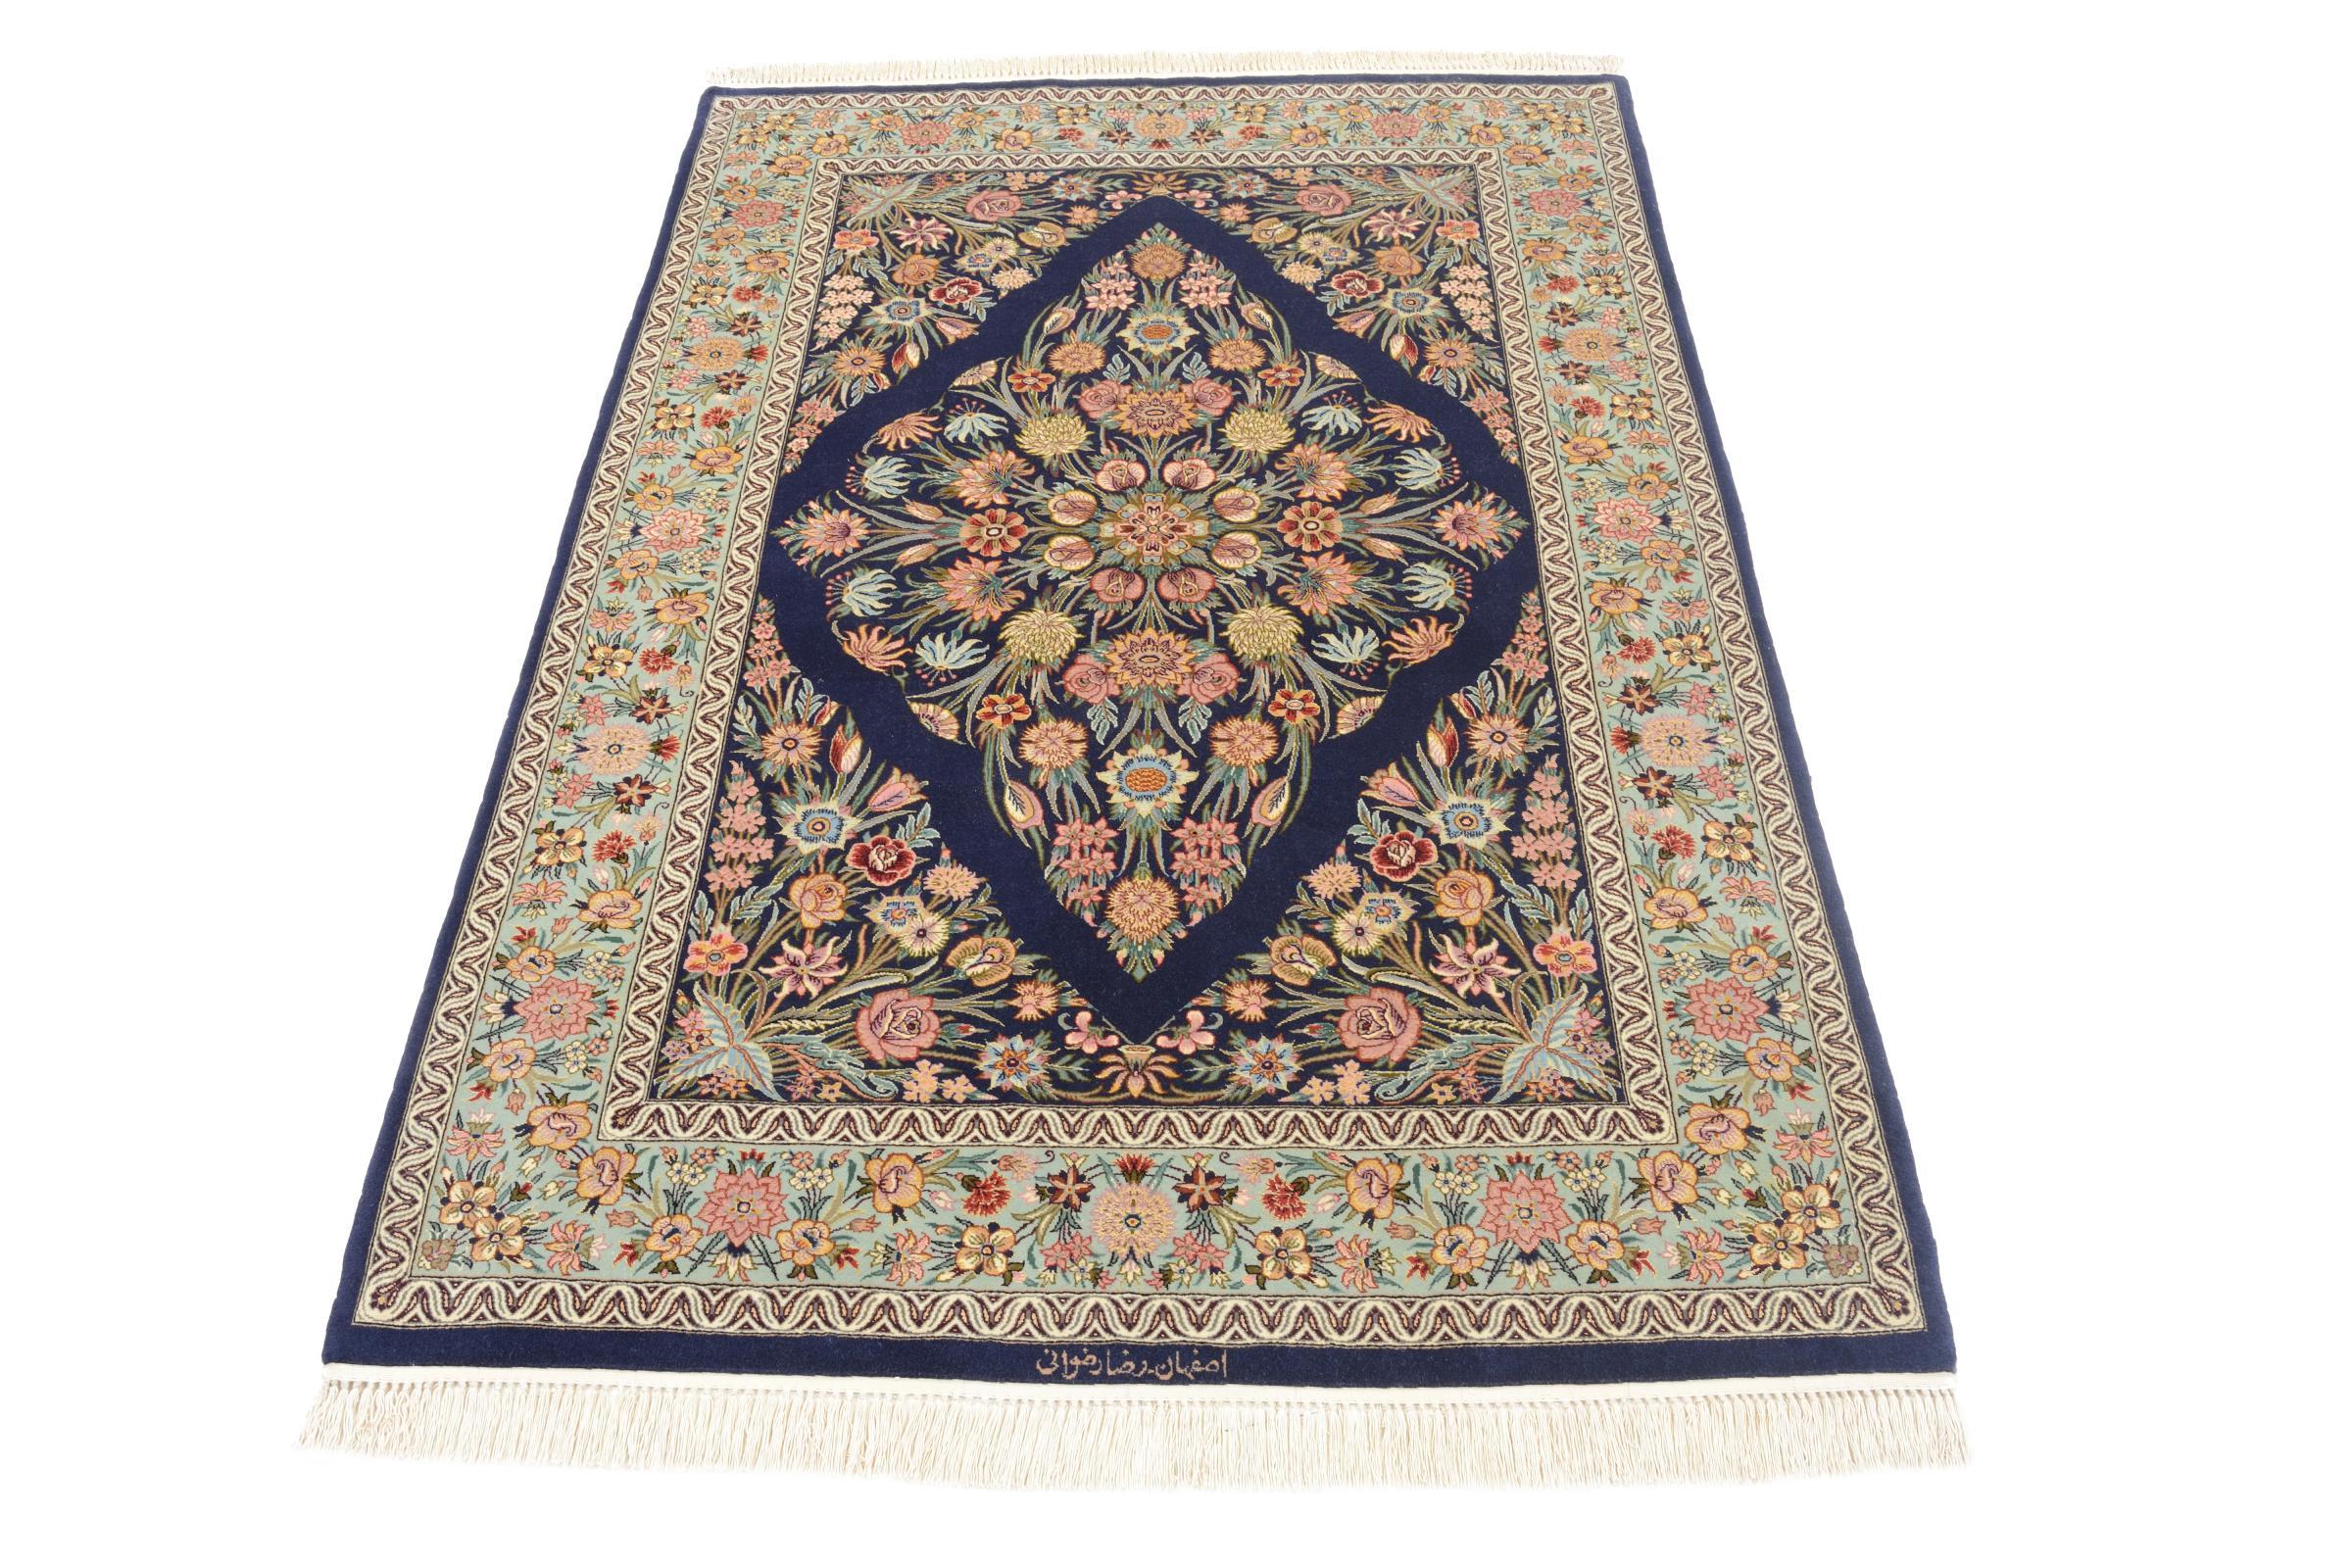 A superb Persian rug, Isfahan Silk Warp, 20th century. 

It can't get any better in quality and reputation than that of this Isfahan. This type of rugs counts among the finest and most beautiful types of oriental rugs. It comes with an exceptional